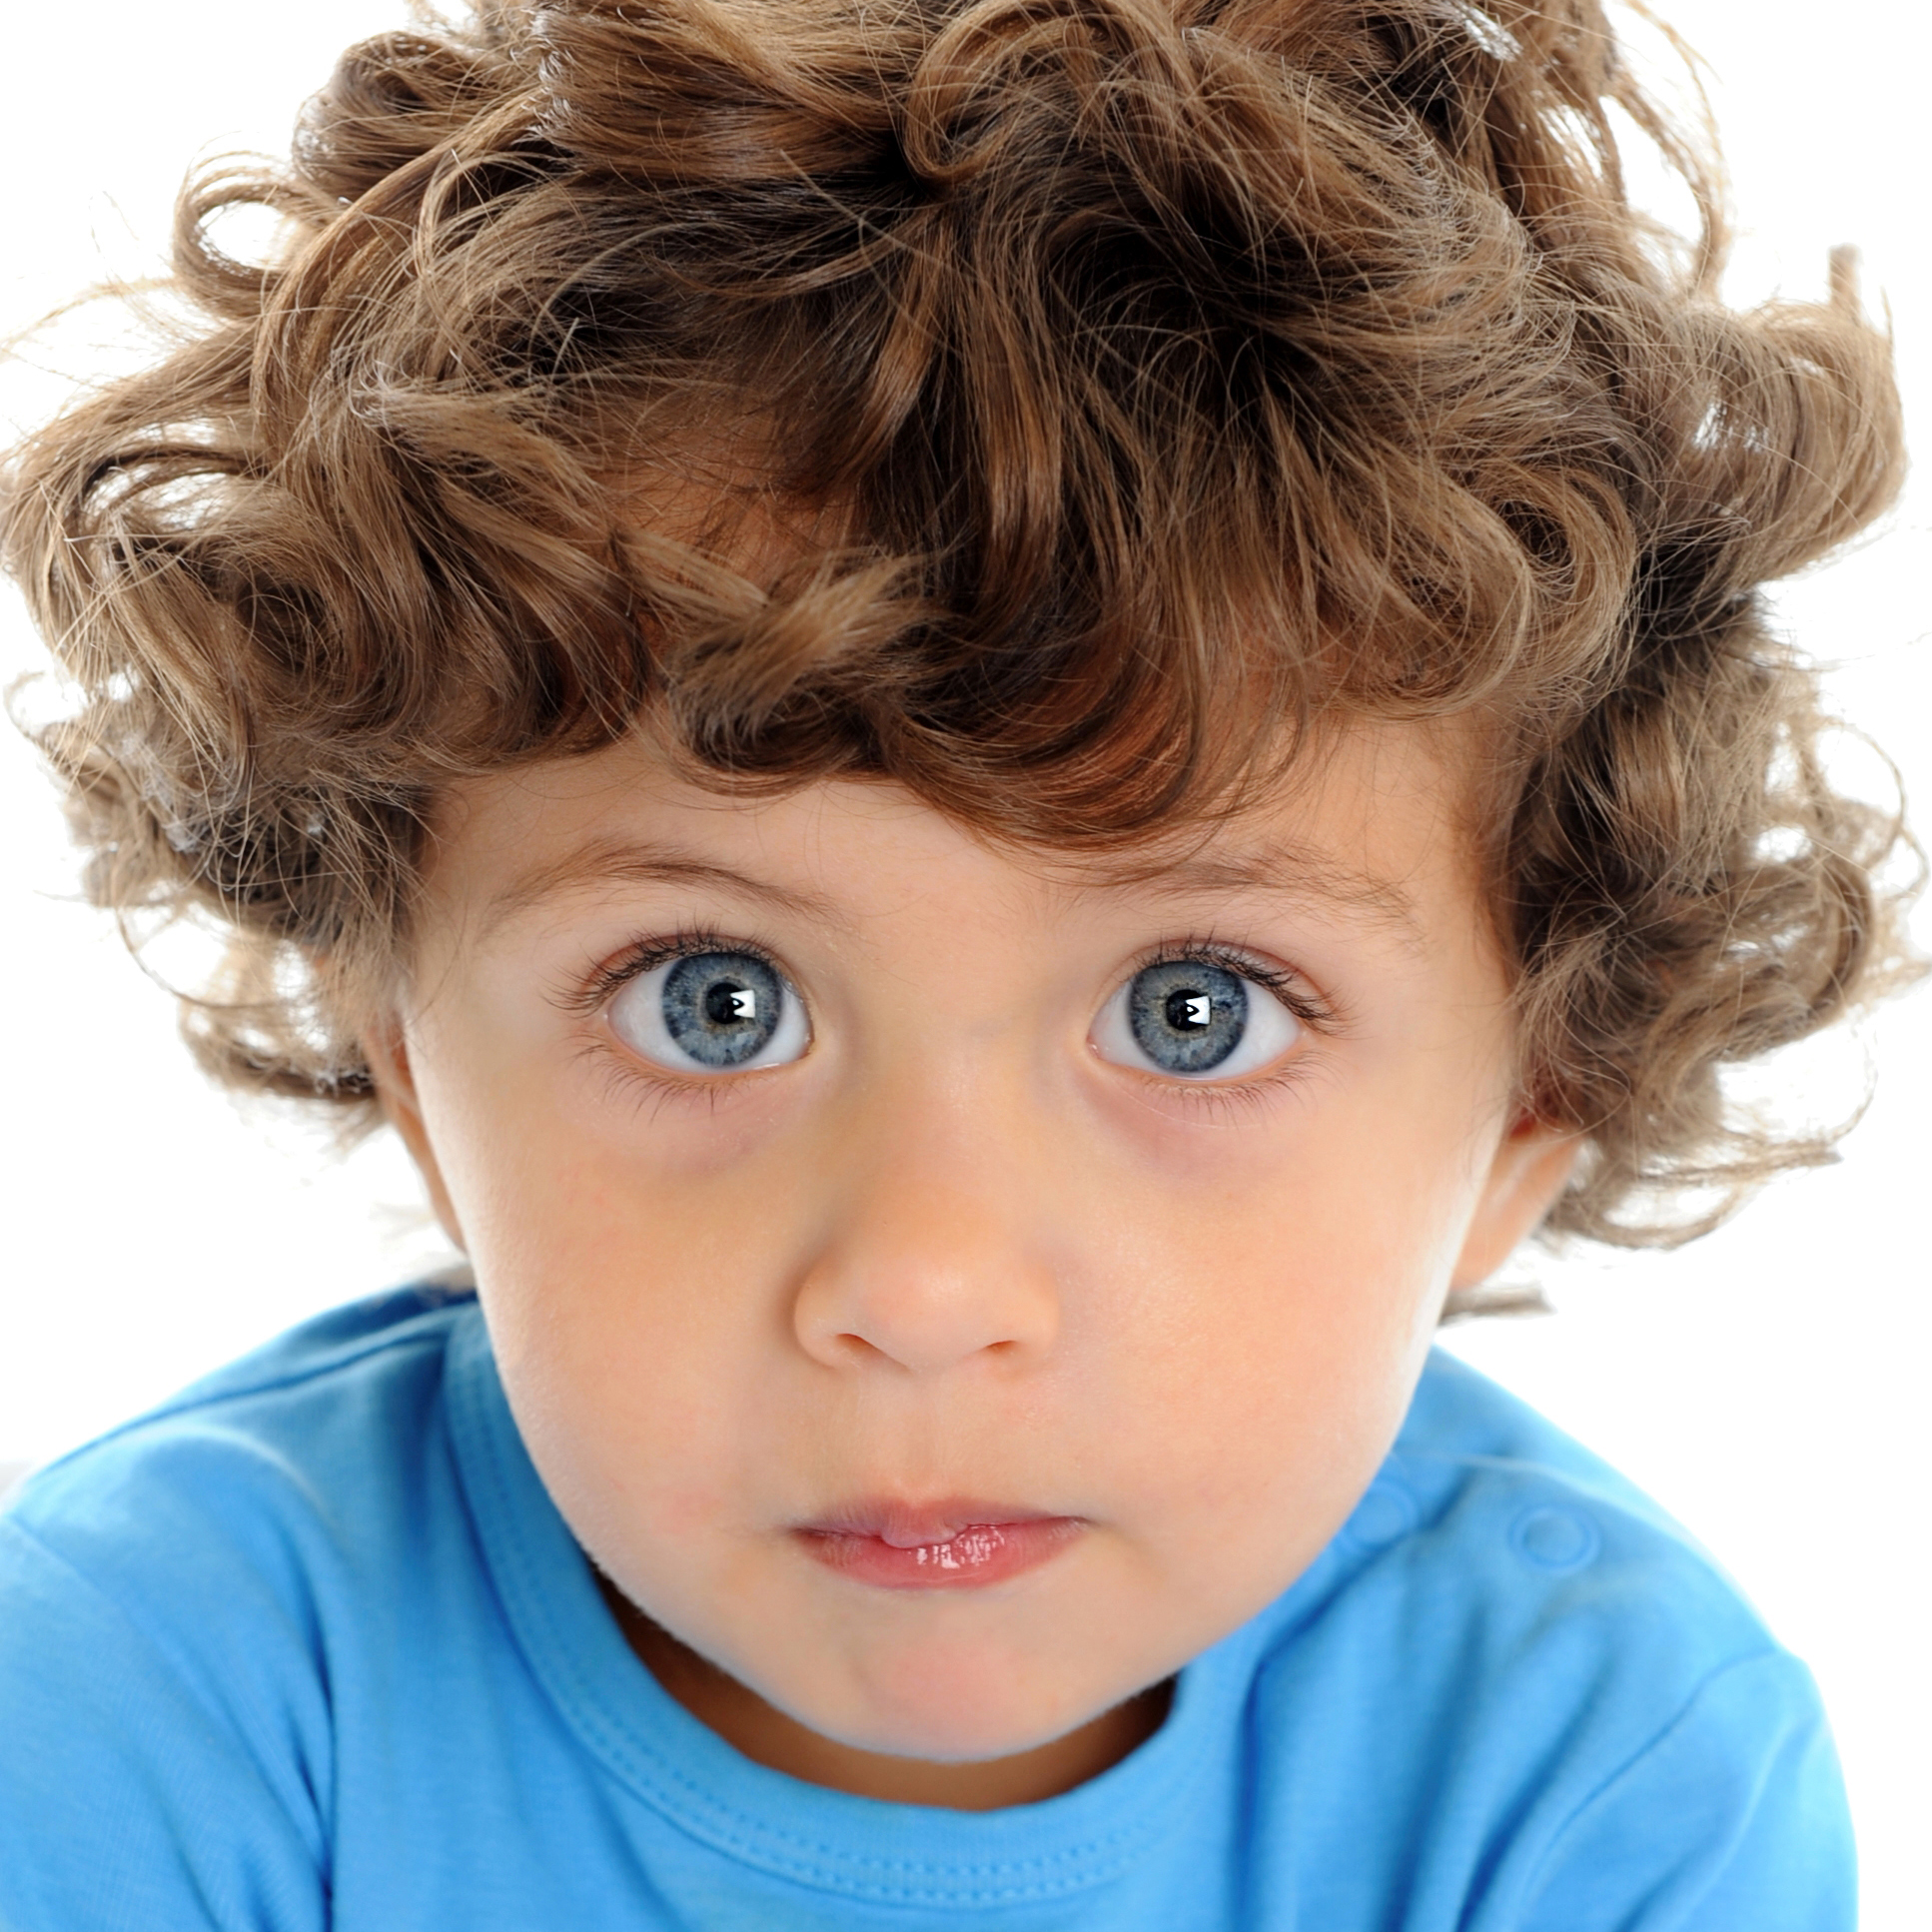 Toddler with big blue eyes in blue t-shirt